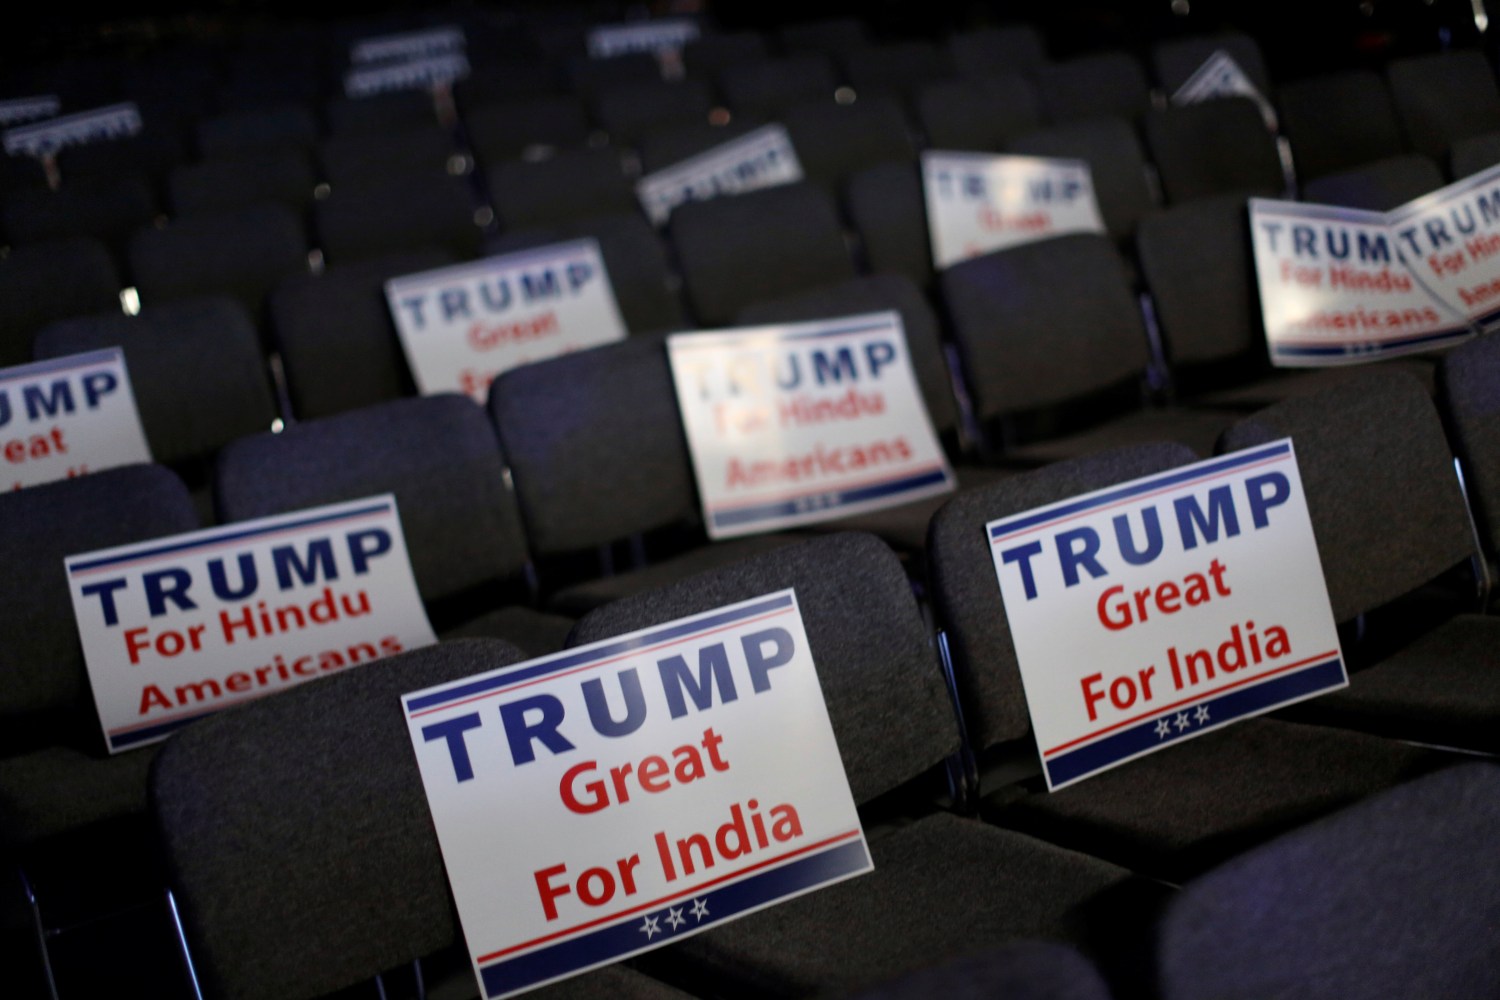 Signs are ready for attendees to hold during Republican presidential nominee Donald Trump's remarks at a Bollywood-themed charity concert put on by the Republican Hindu Coalition in Edison, New Jersey, U.S. October 15, 2016. REUTERS/Jonathan Ernst - RTX2P03T